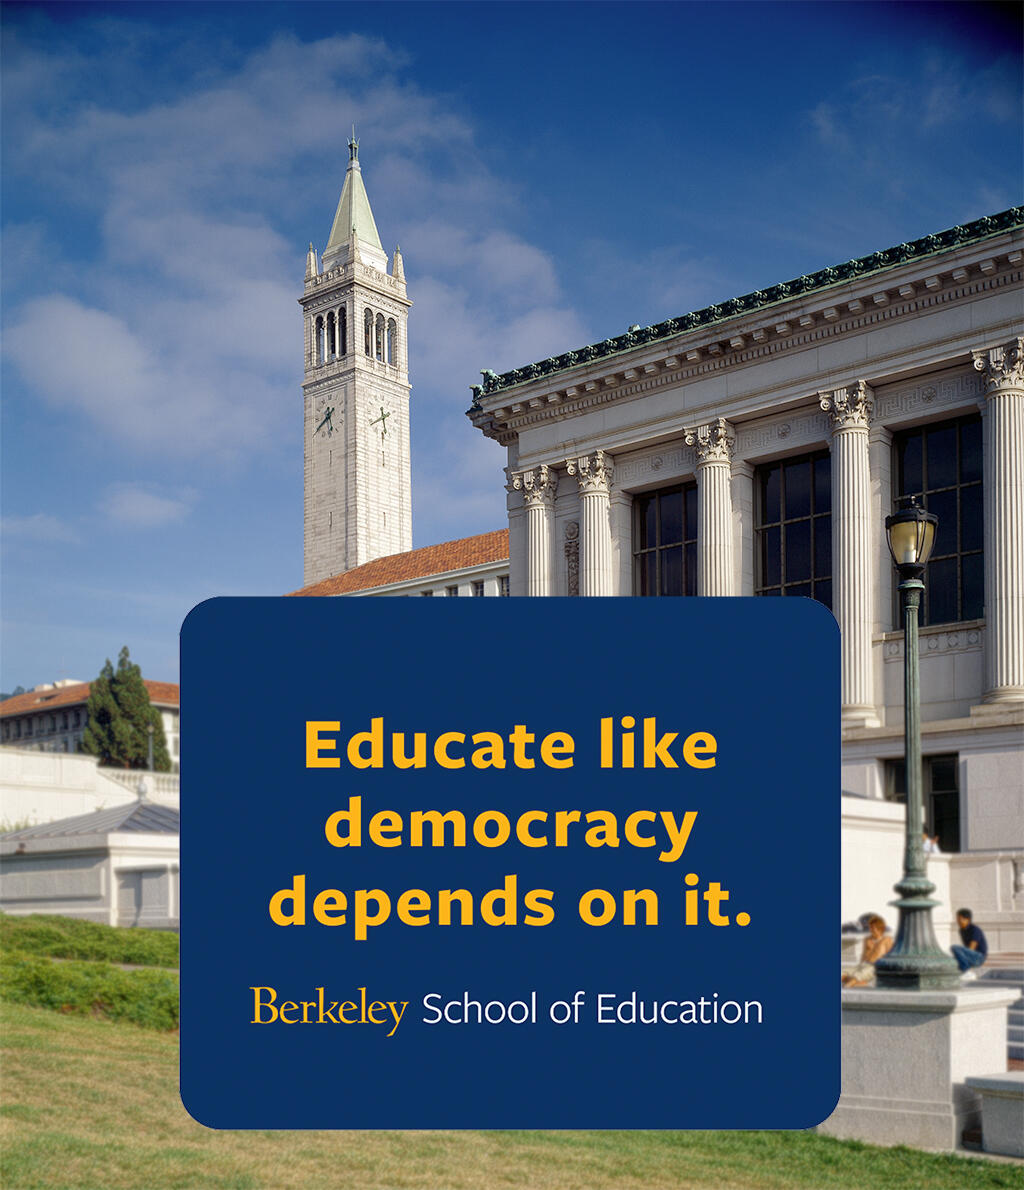 campanile in the background text reads educate like democracy depends on it berkeley school of education